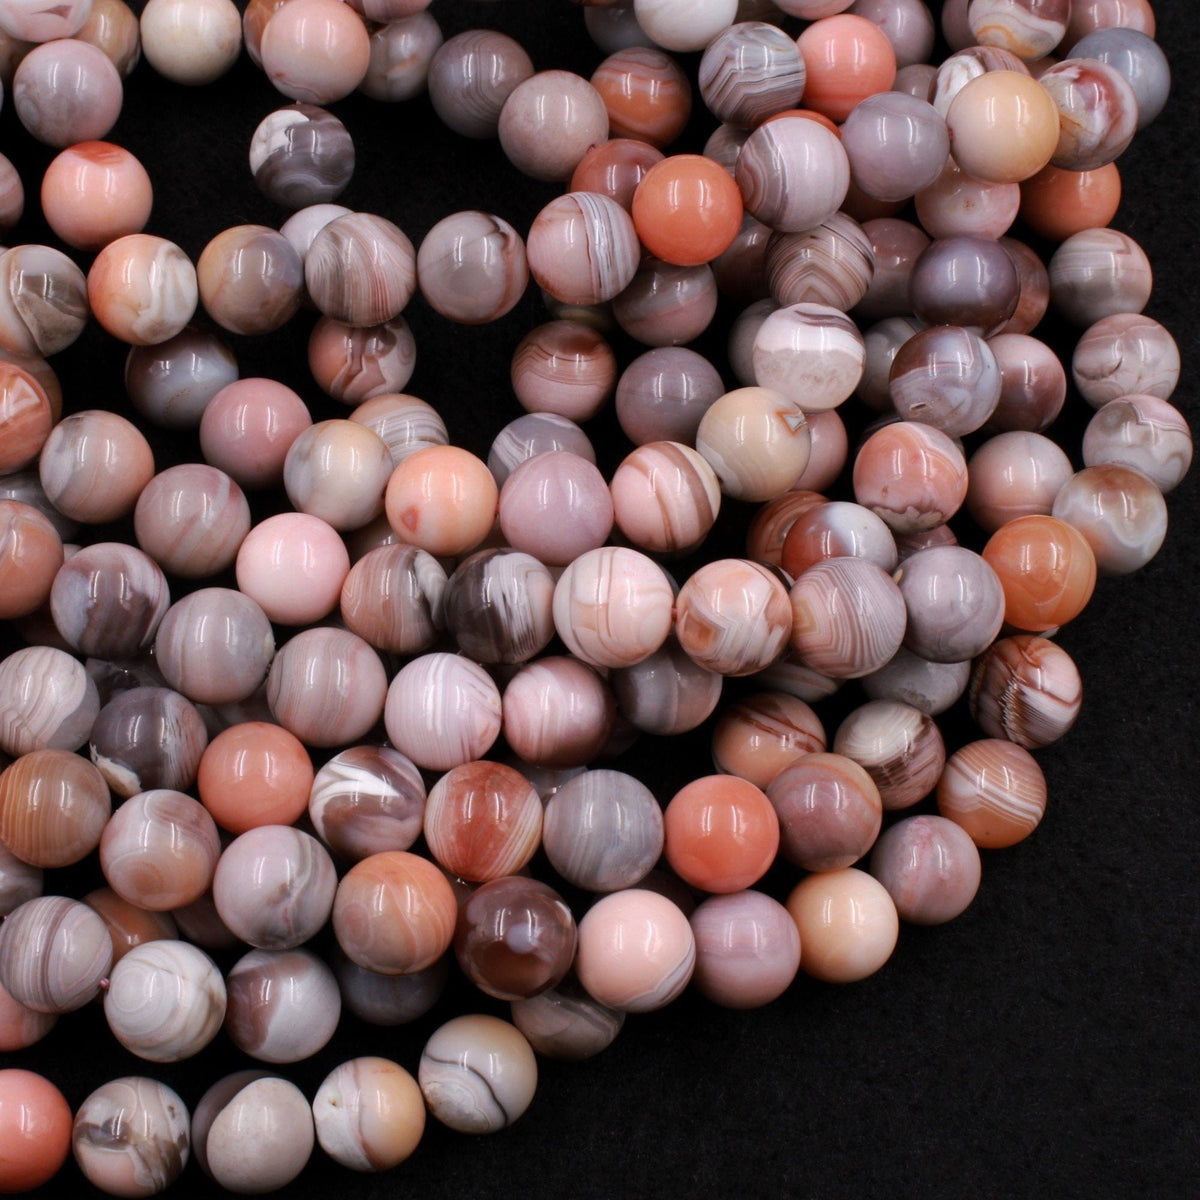 6-10mm Natural Genuine Pink agate Beads AAAAA Grade Smooth Round Gemstone Beads 6mm 8mm 10mm Full Strand DIY Jewelry Making